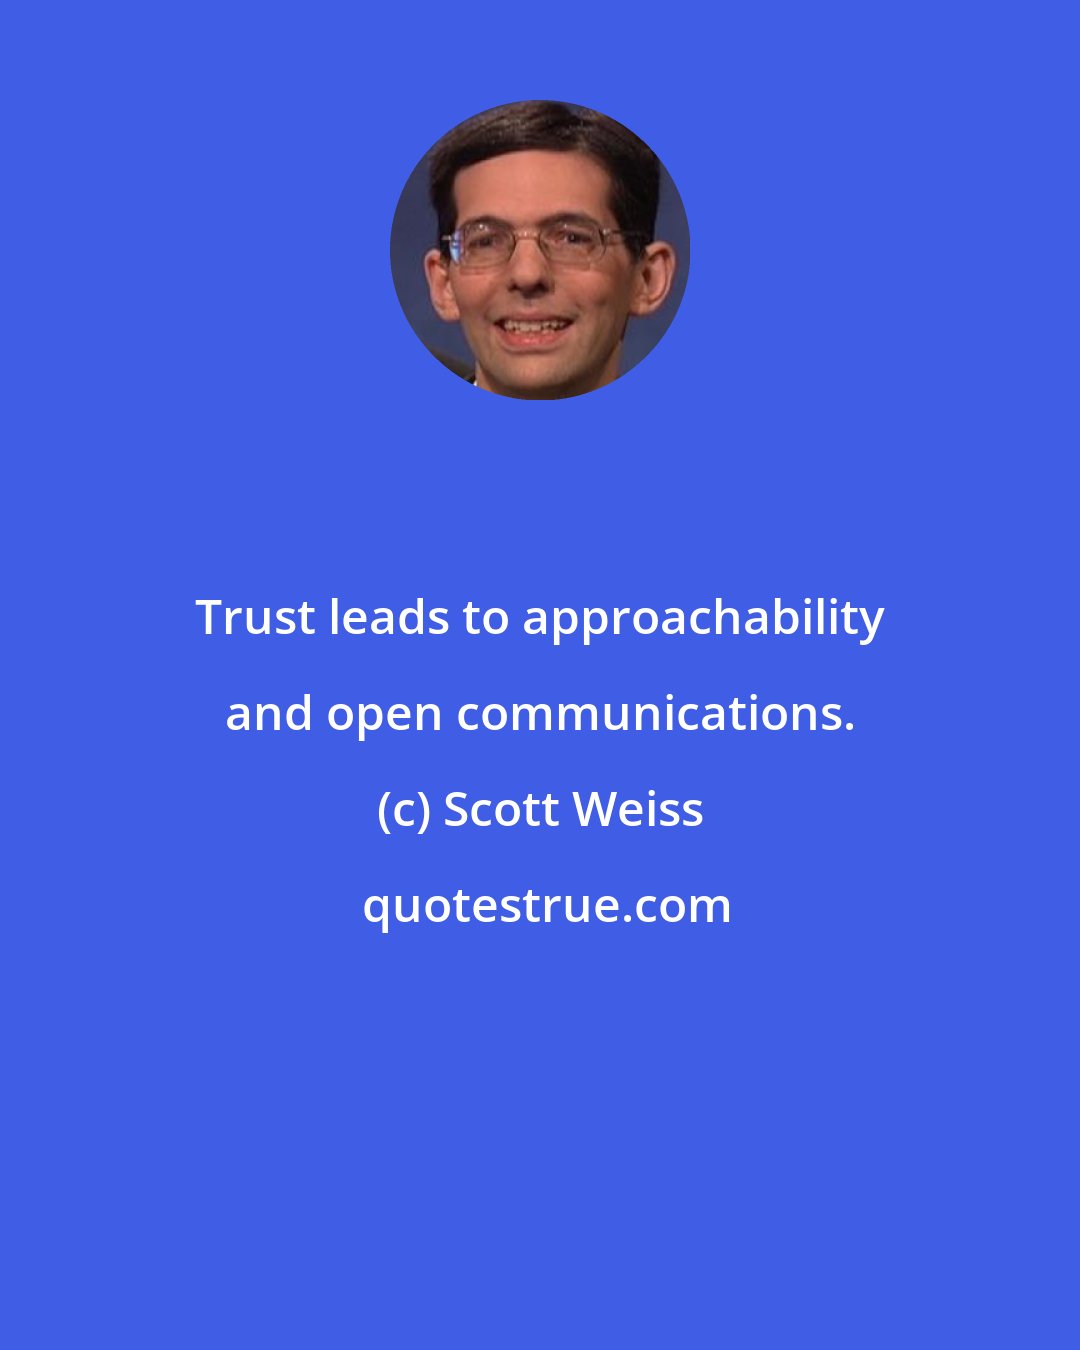 Scott Weiss: Trust leads to approachability and open communications.